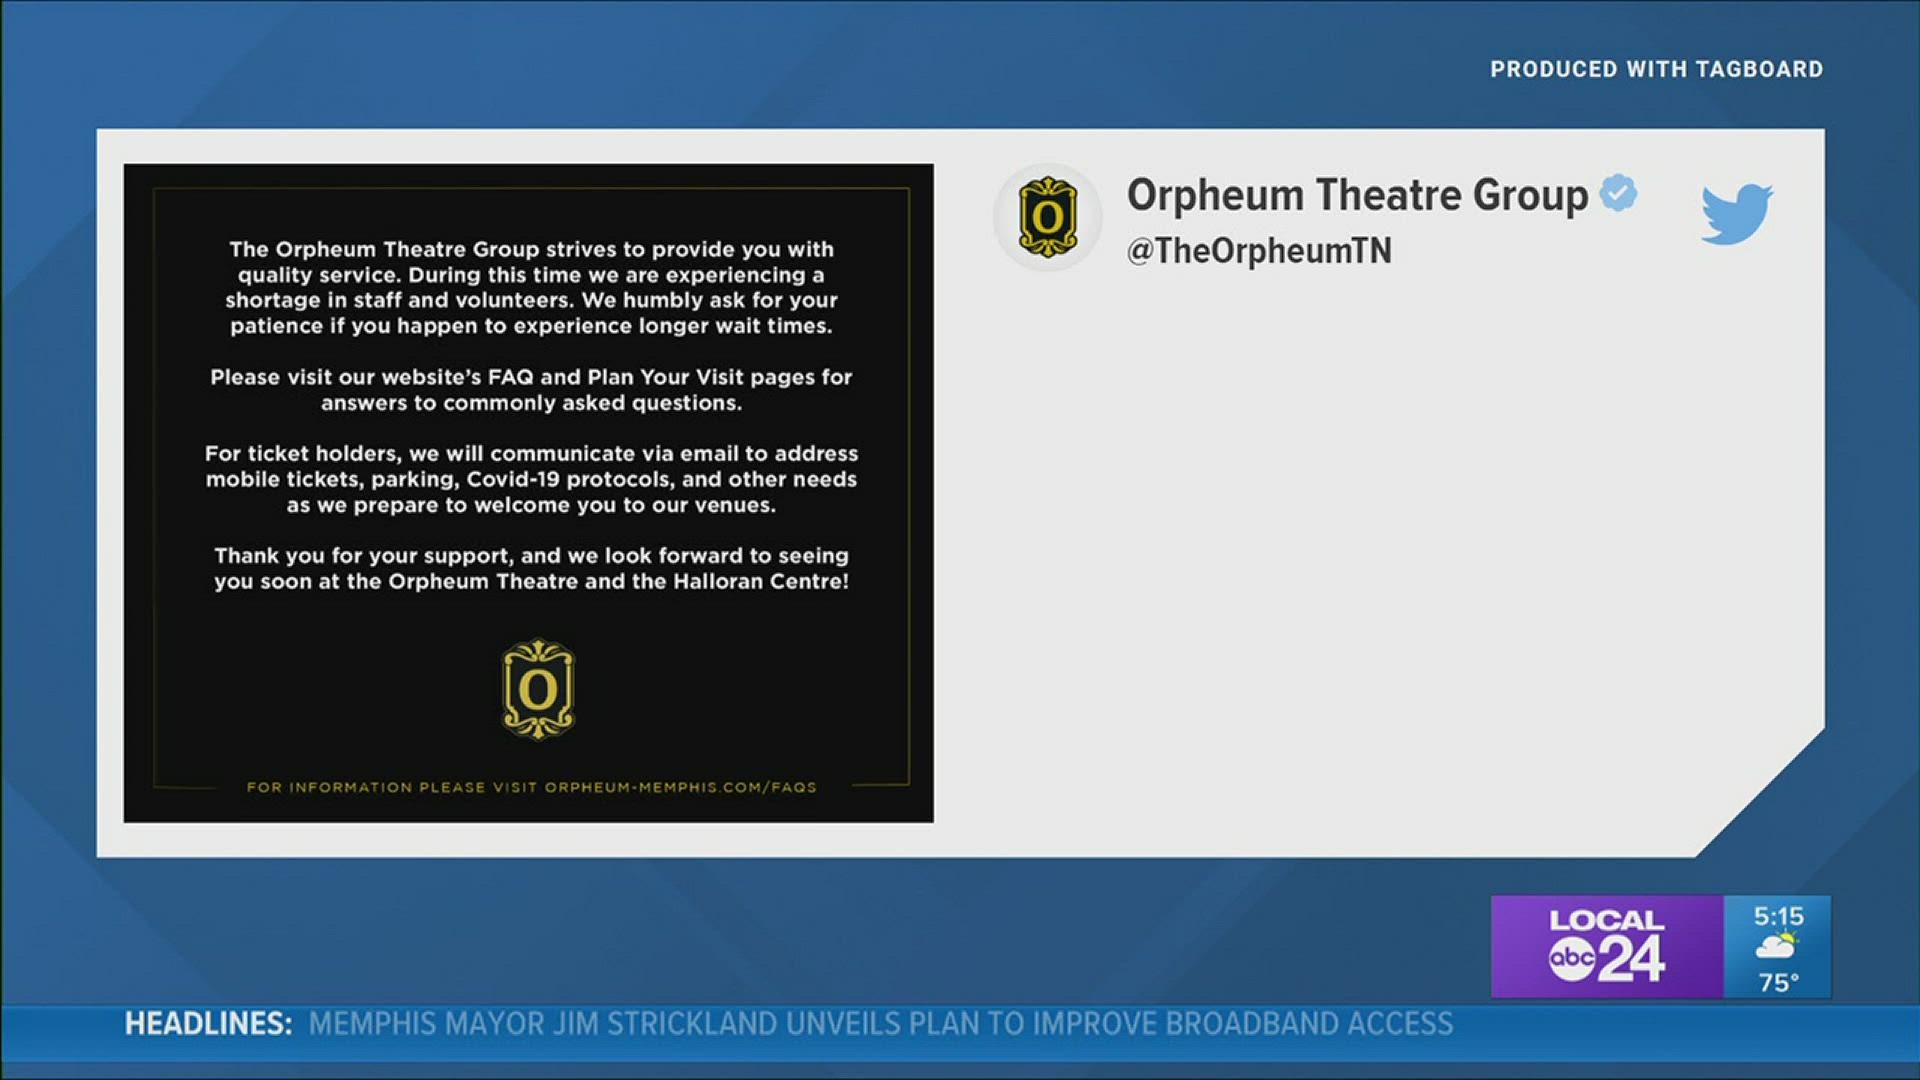 “The Orpheum Theatre Group strives to provide you with quality service. During this time we are experiencing a shortage in staff and volunteers.”